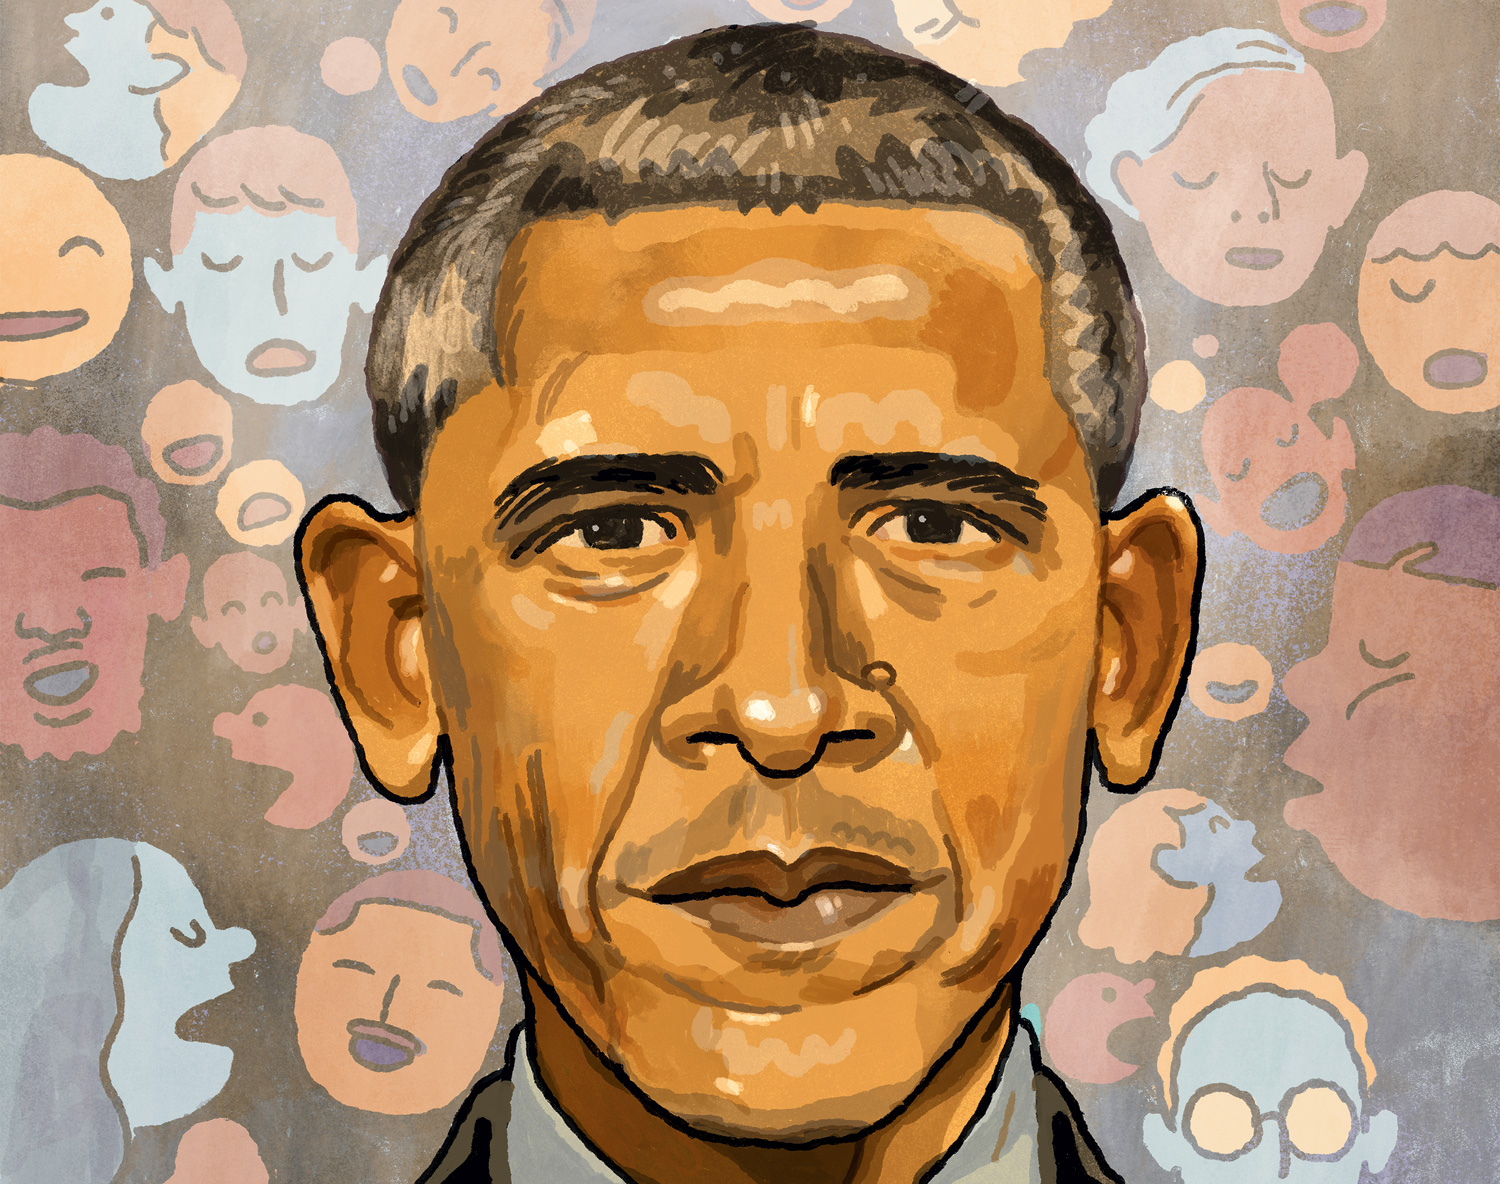 Illustrated portrait of Barack Obama by Richie Pope